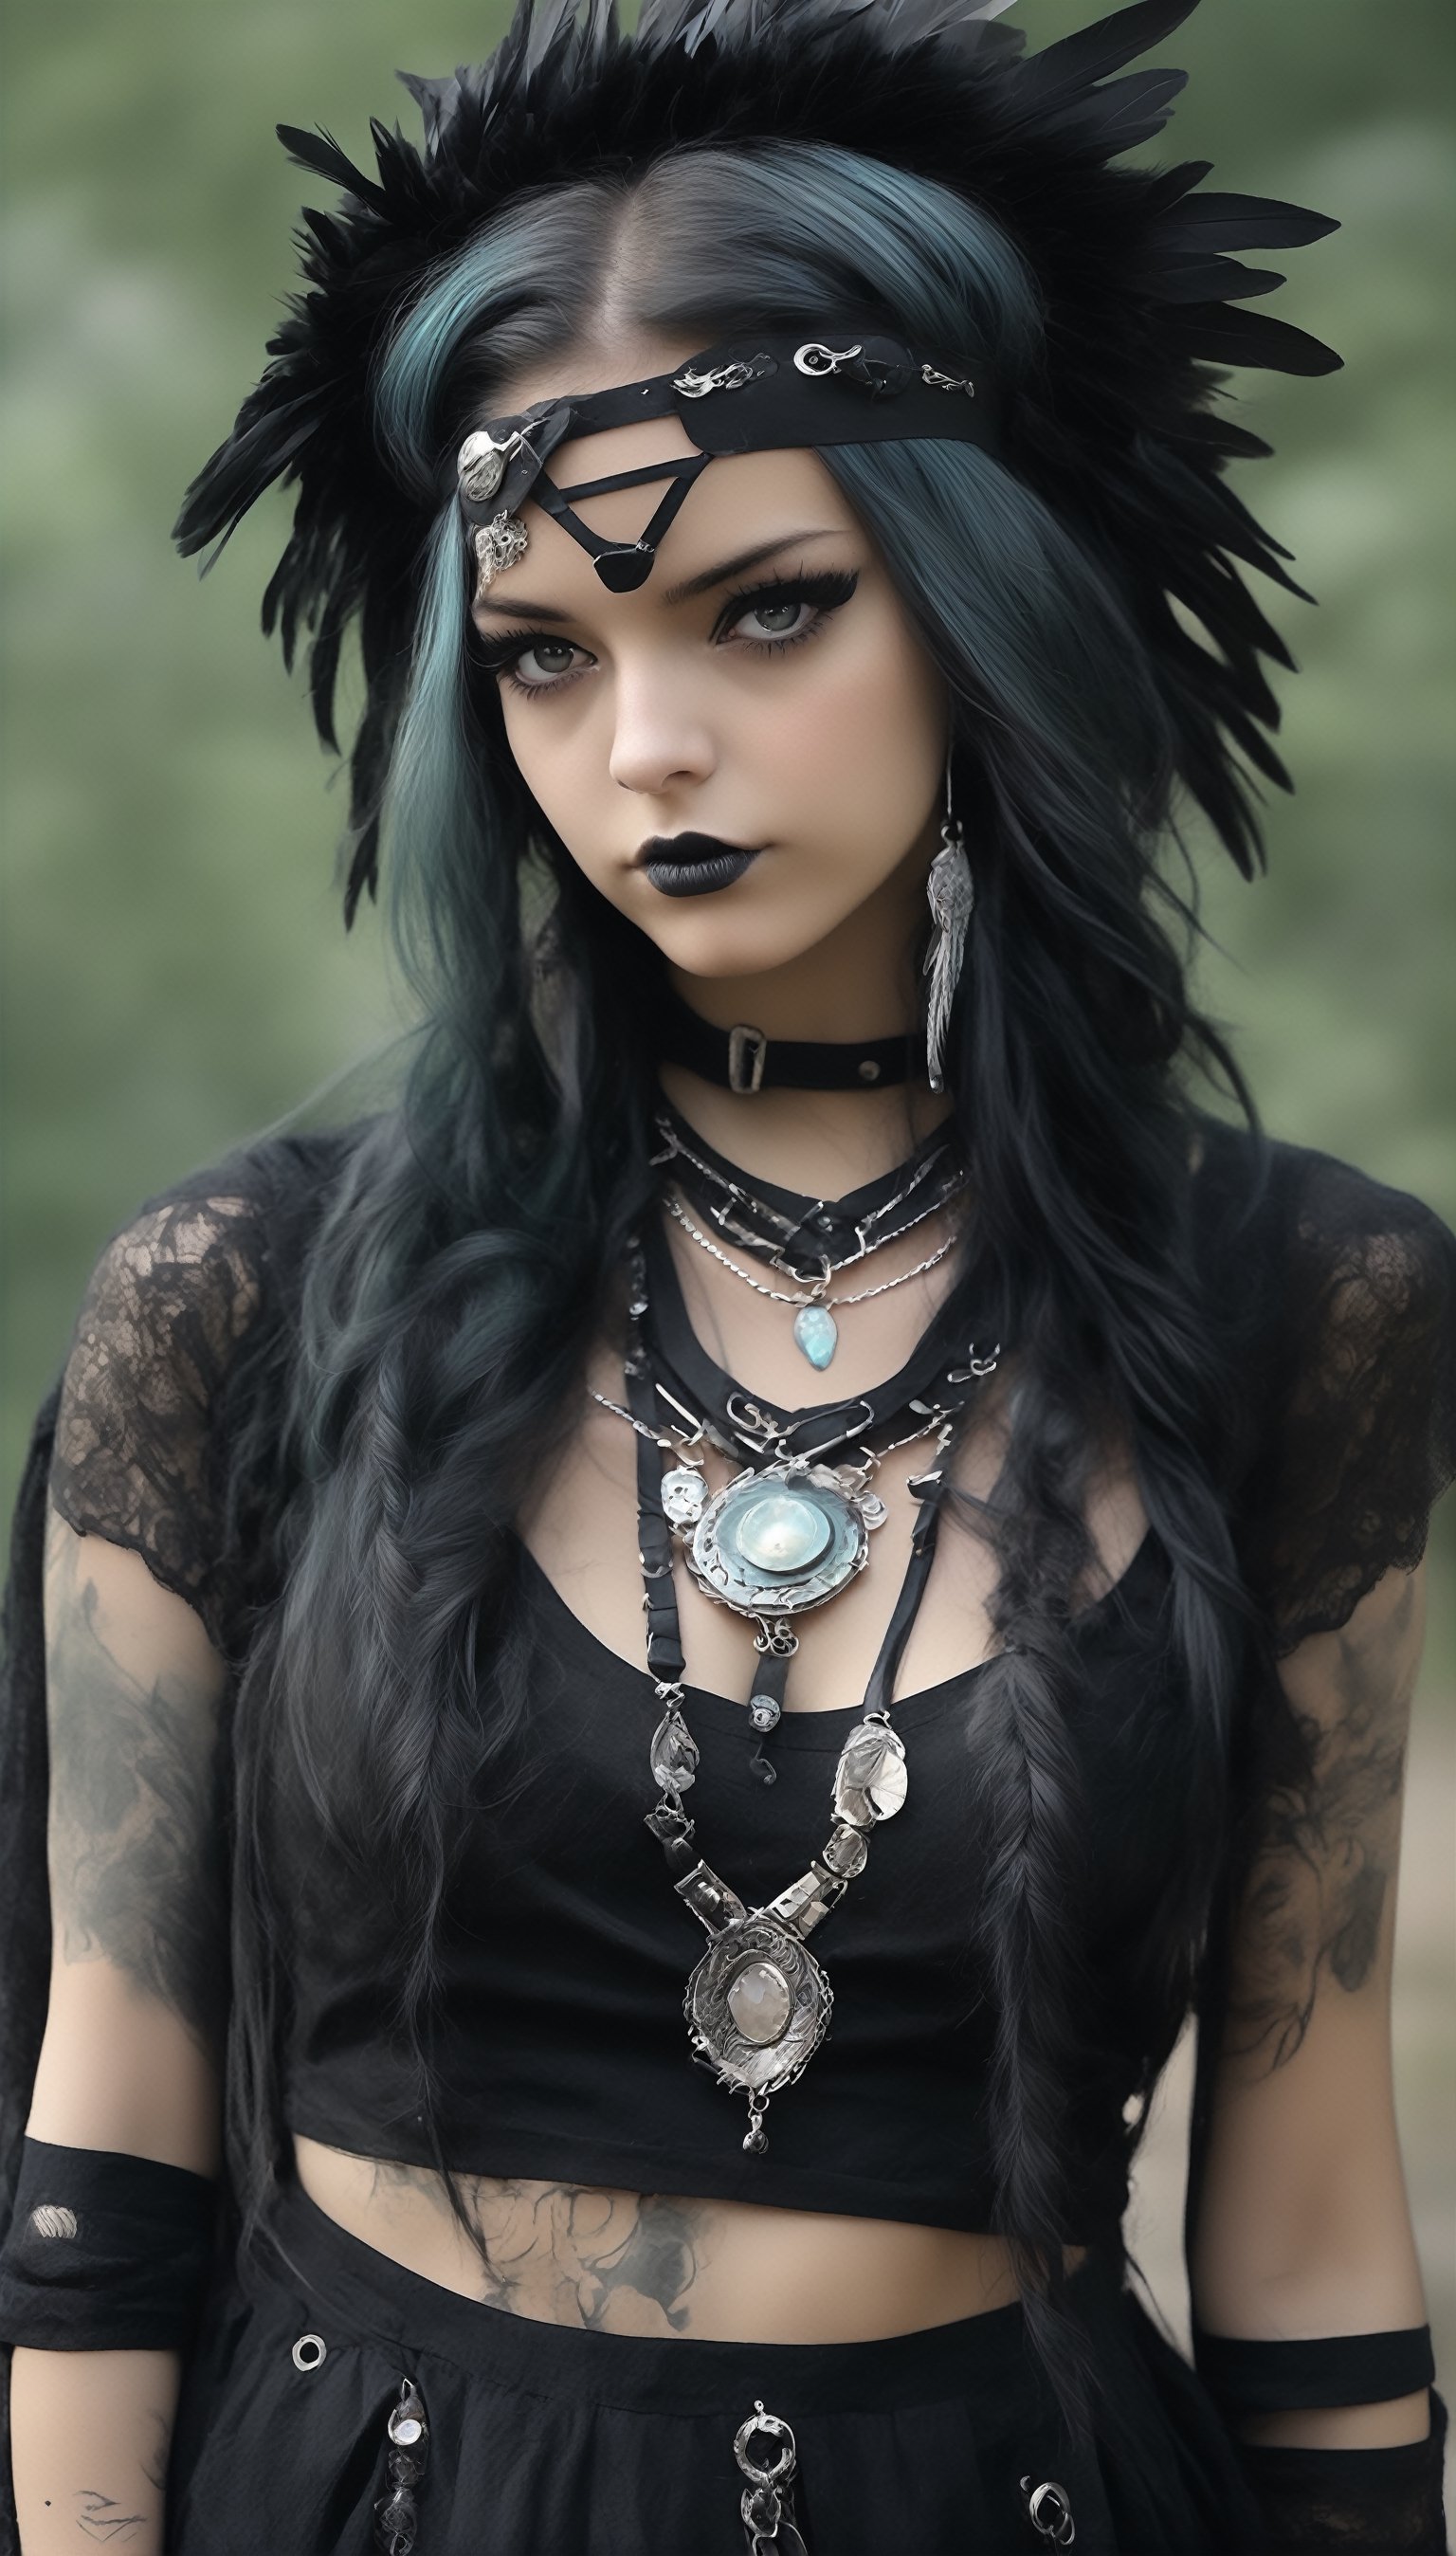 beautiful Nordic girl,Wearing  gothic punk and Native American styles, brings forth a unique fashion statement,intricate colorful leather detailing, feathered accessories, and bold silver jewelry blending the edginess of gothic punk,traditional elements of Native American attire,This unconventional combination creates a striking and culturally rich,GothEmoGirl,rebevelin,pastel goth